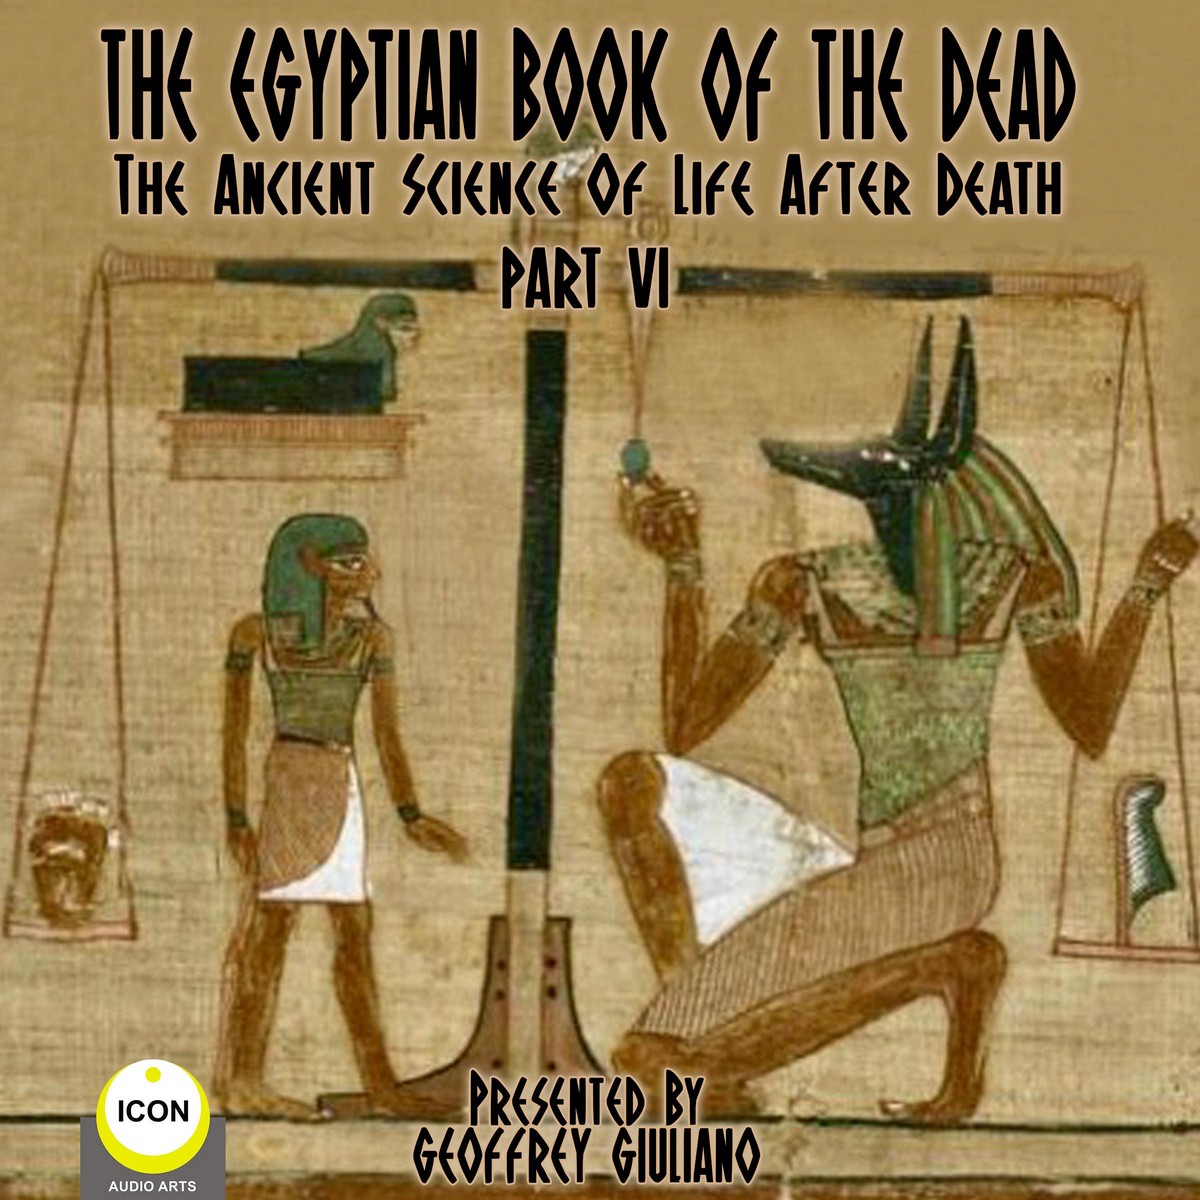 The Egyptian Book Of The Dead – The Ancient Science Of Life After Death – Part 6